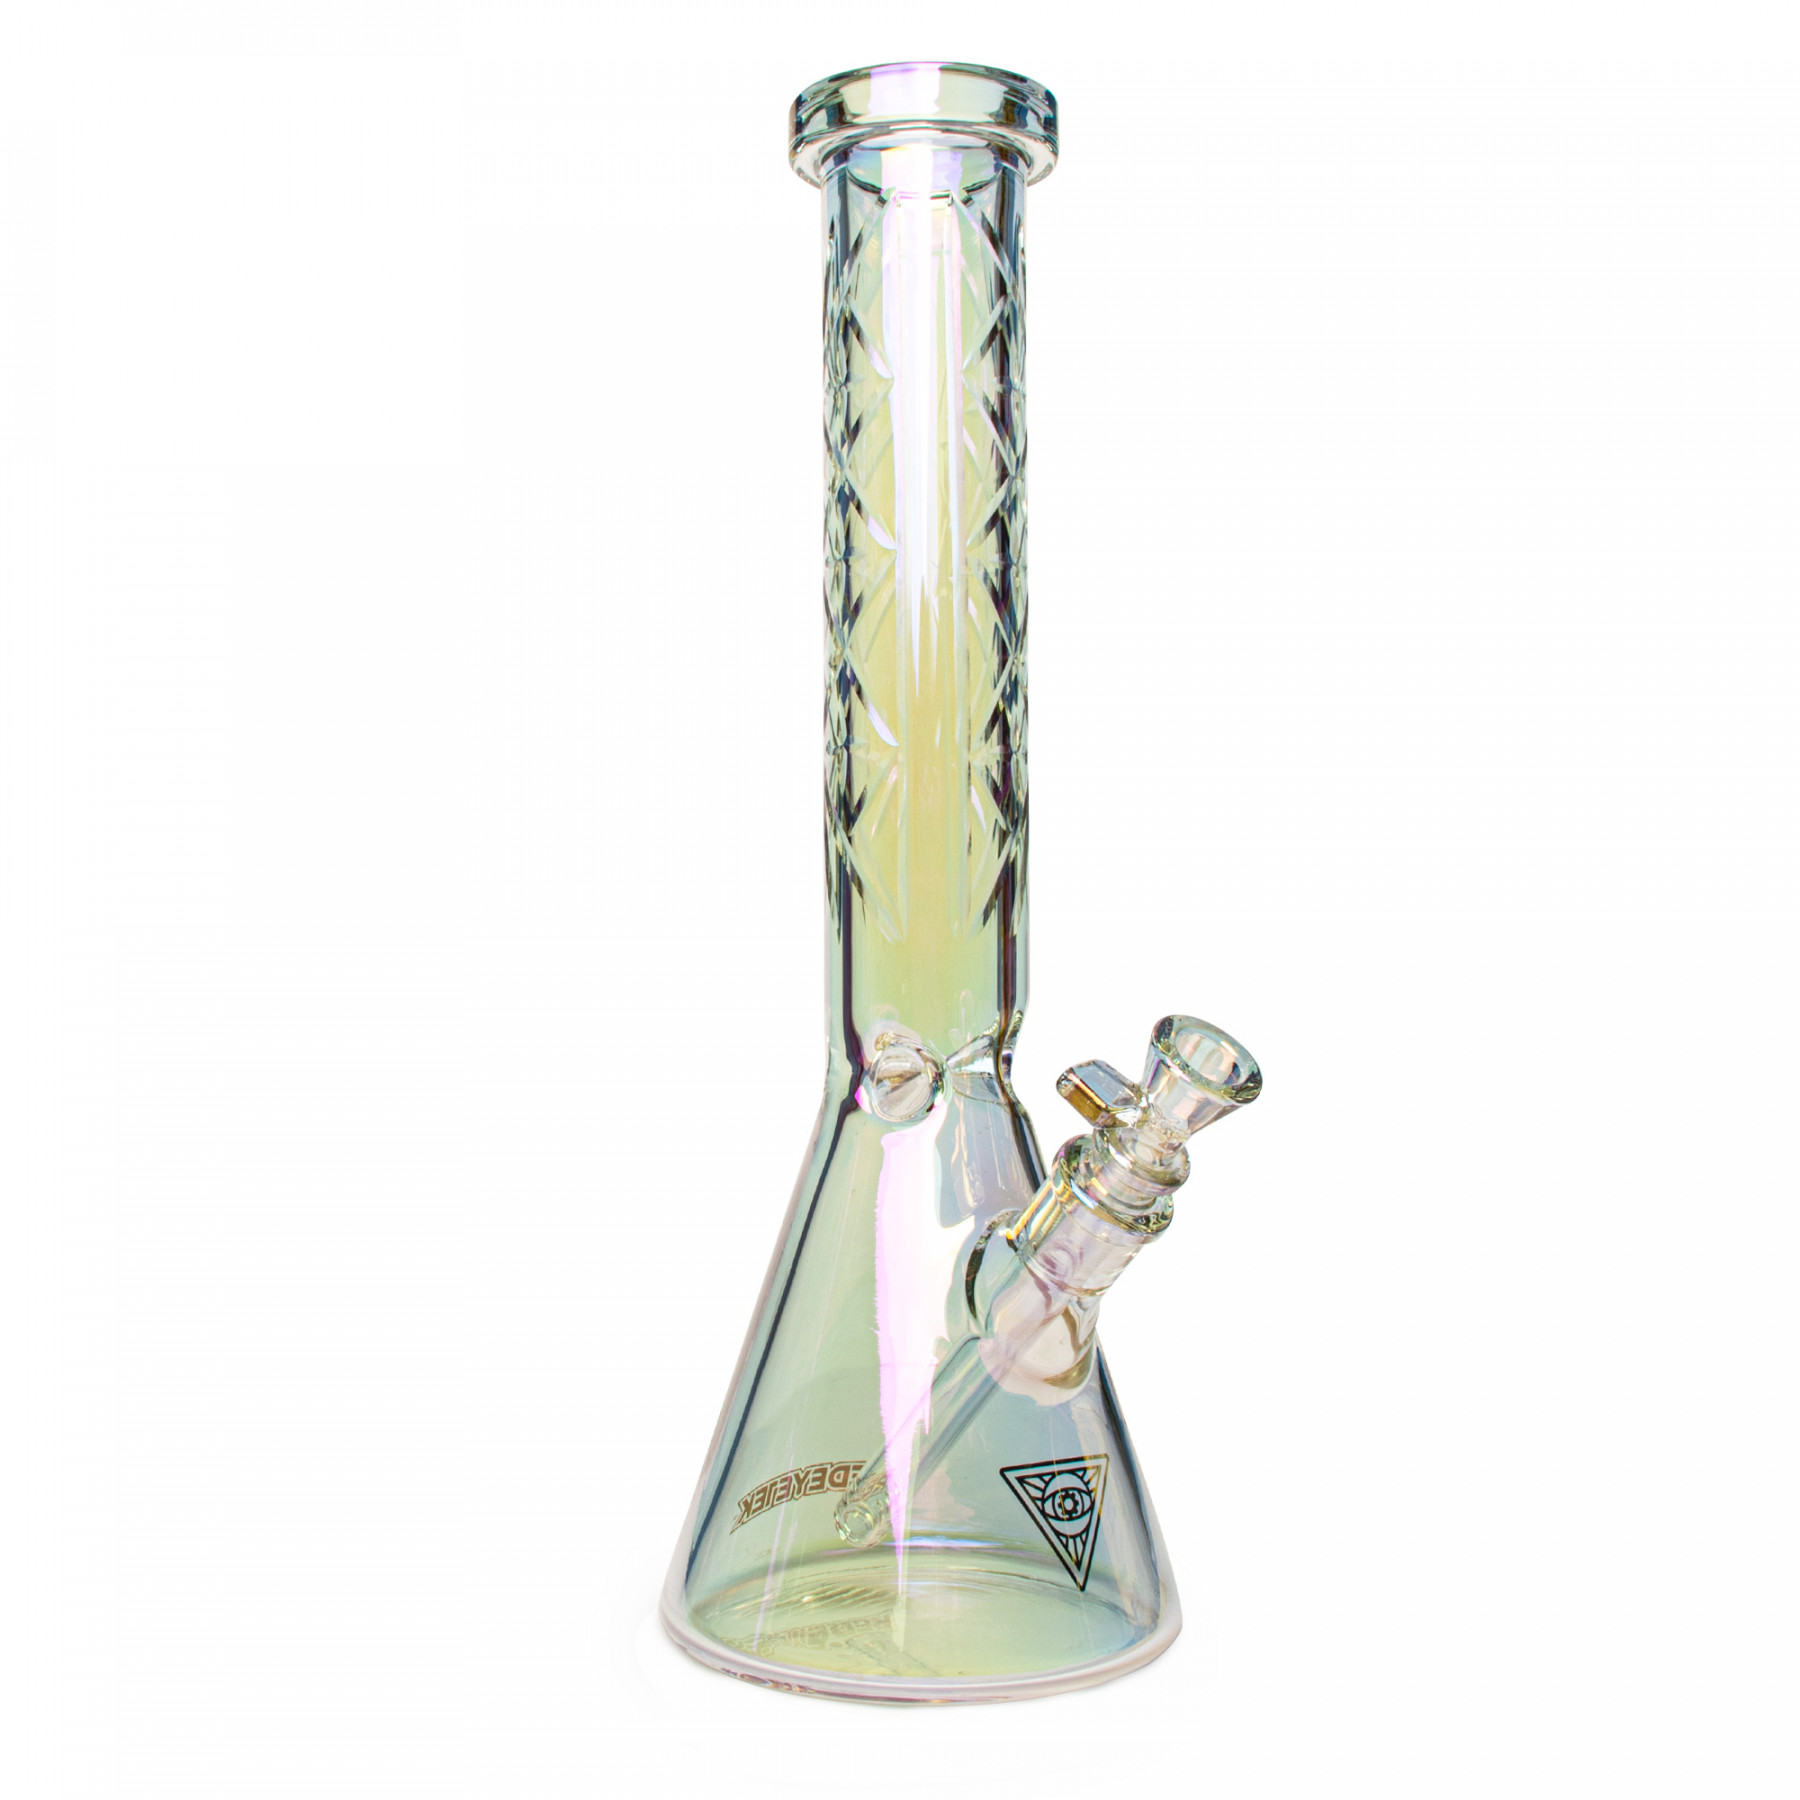 15" 7mm Thick Metallic Terminator Finish Traditions Series Beaker Tube W/Multi-Pointed Hobstar Details